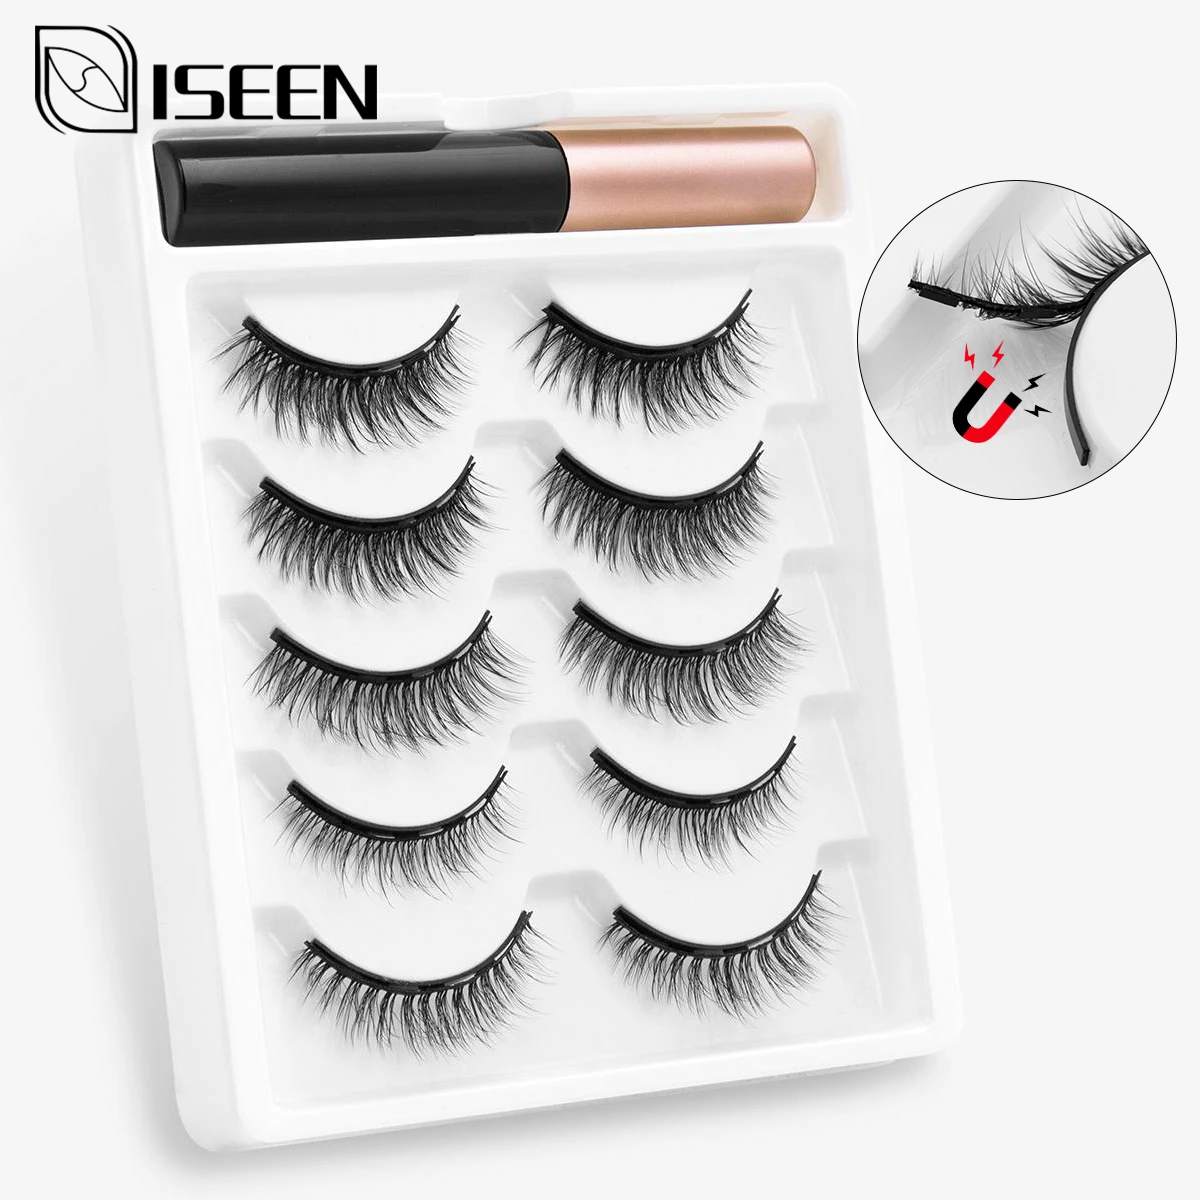 2/5 Pairs 3D Magnetic Eyelashes Natural Curler False Lashes Magnetic Eyeliner Set Mink Fake Lashes Makeup Extension maquiagem